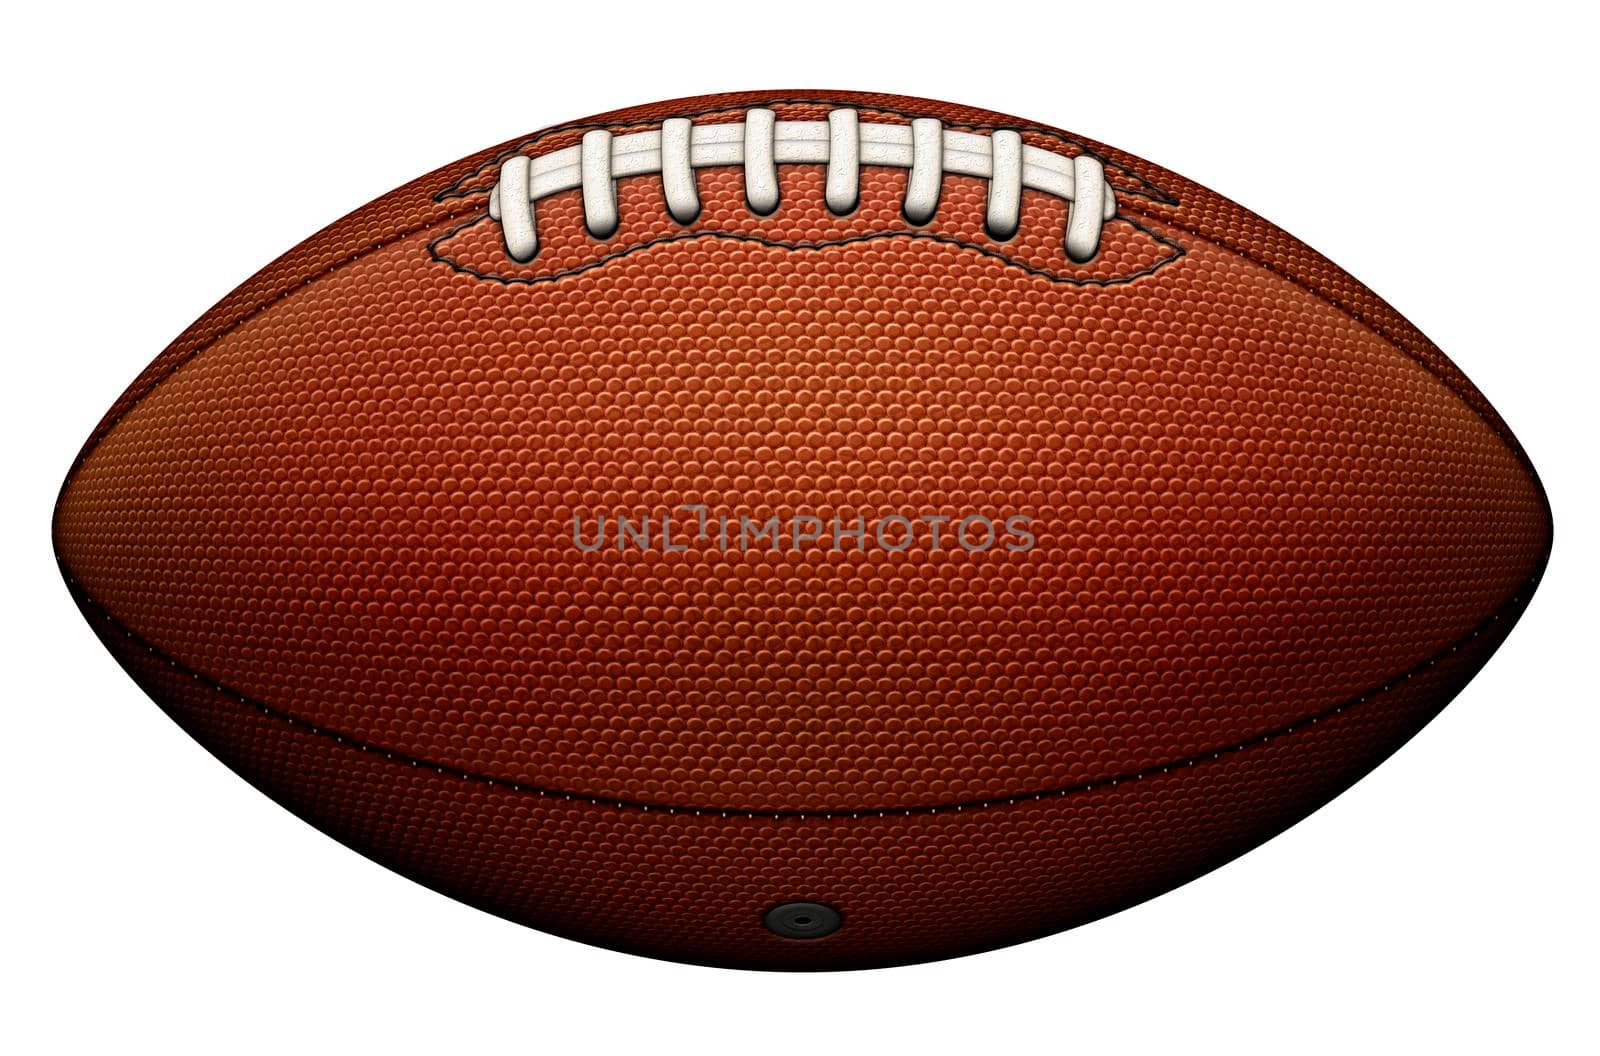 An american football  with the laces positioned at top without any labels or inscriptions. Also isolated from the background.